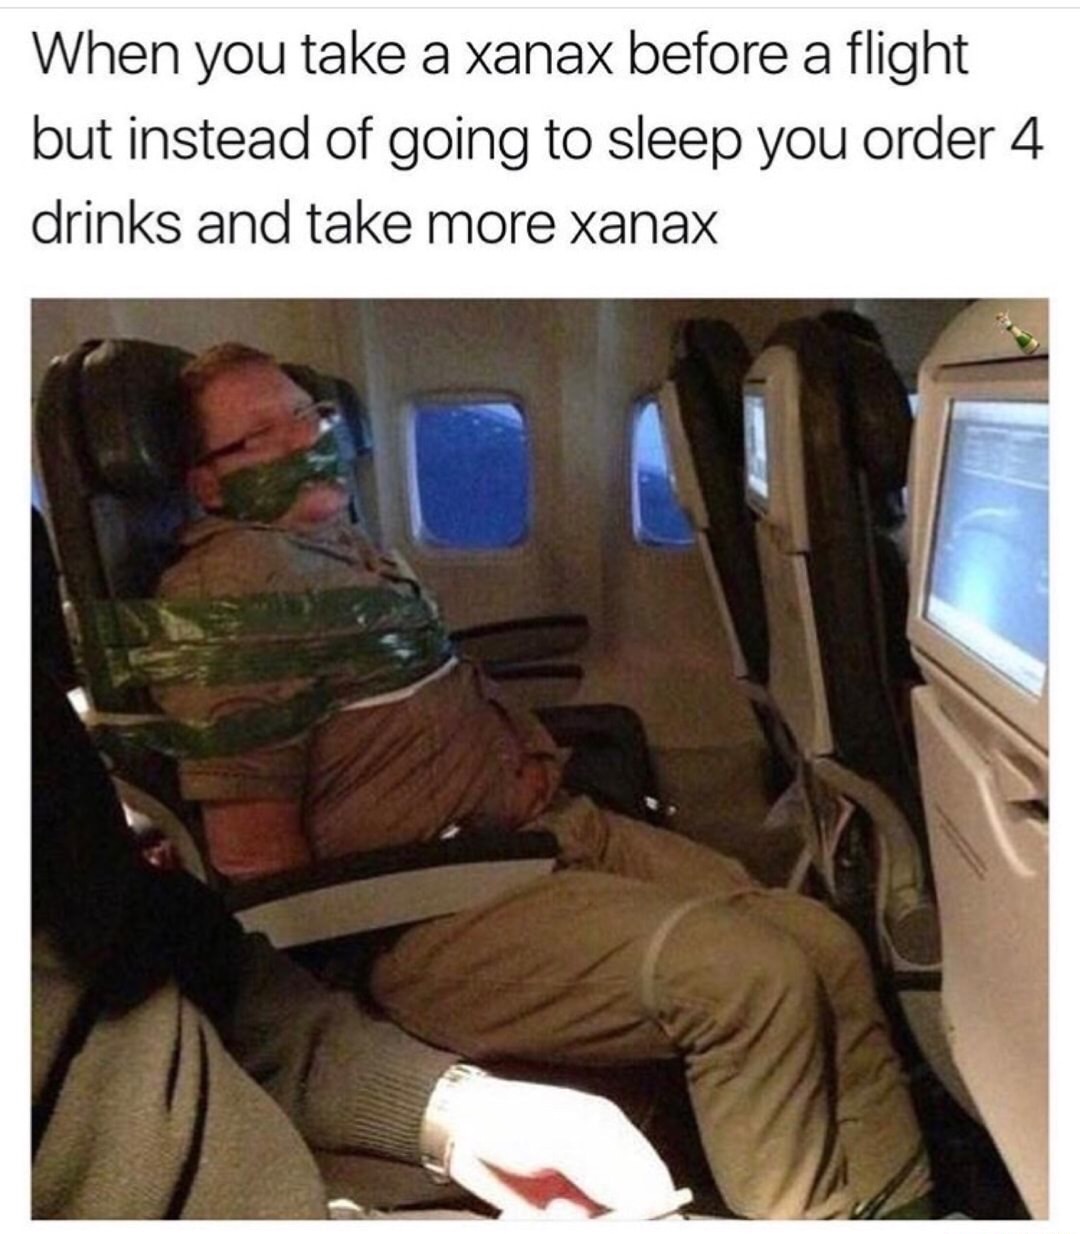 icelandair taped passenger - When you take a xanax before a flight but instead of going to sleep you order 4 drinks and take more xanax